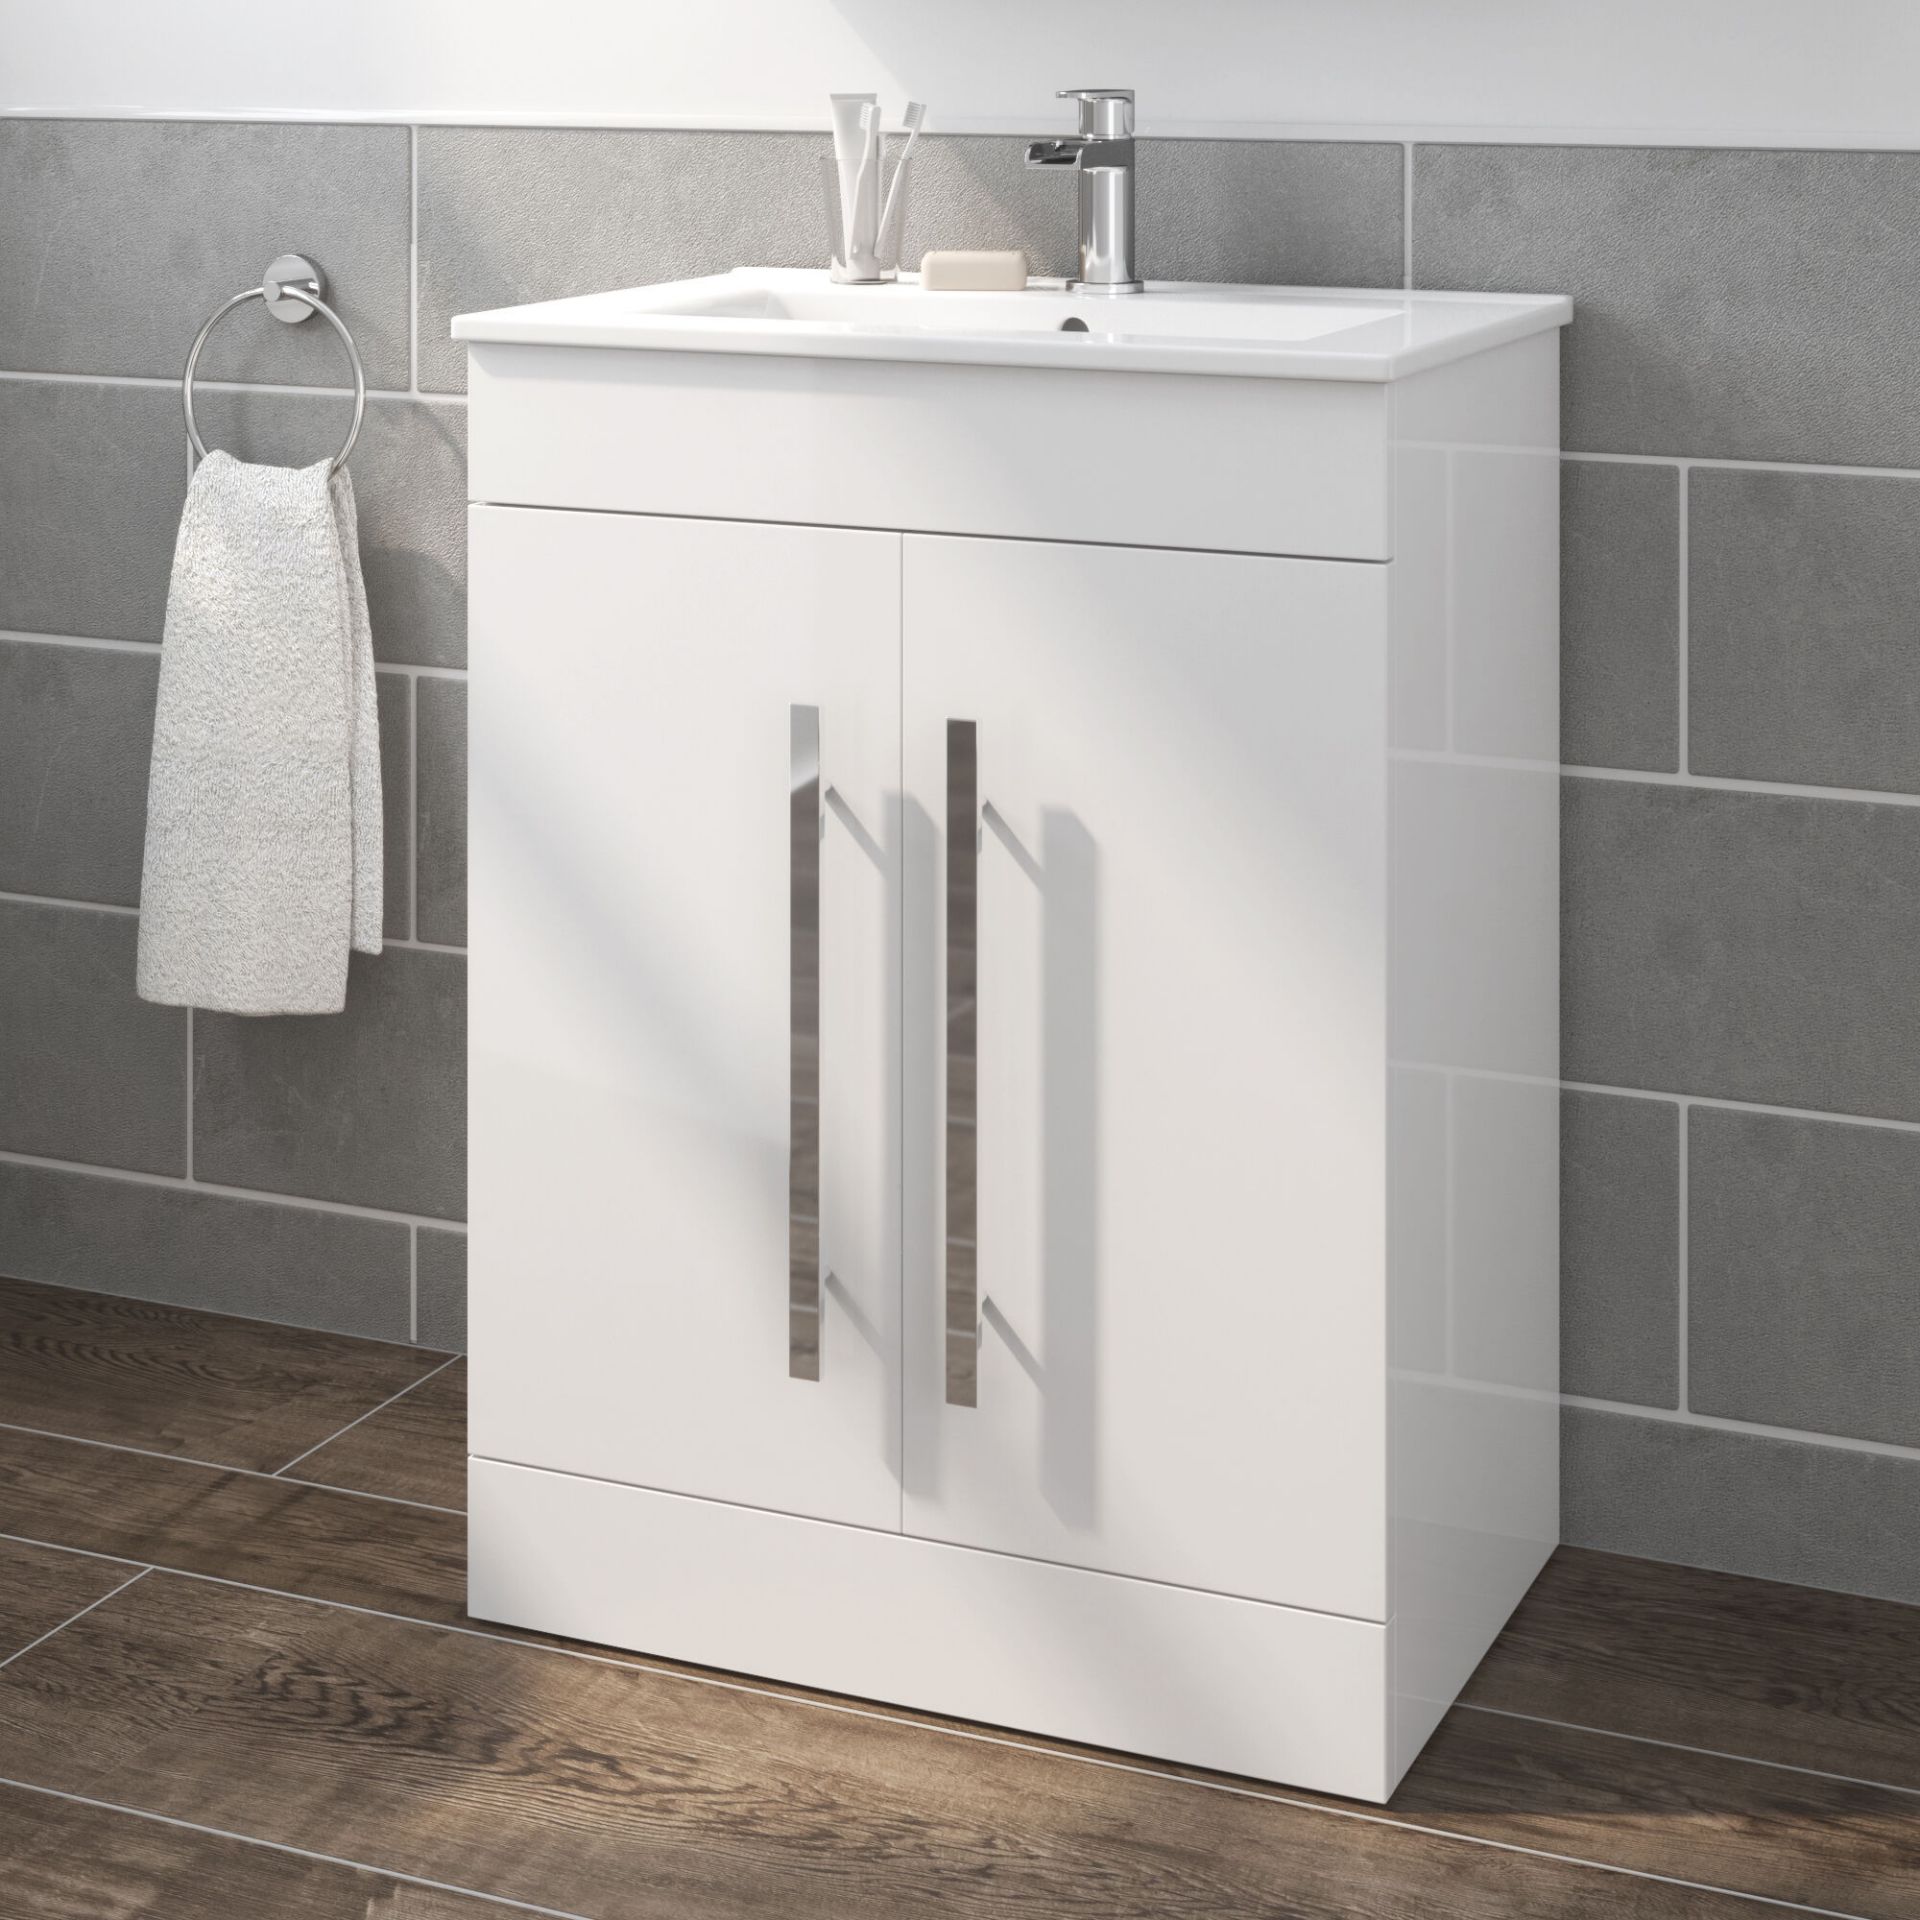 (PT17) 600mm Avon High Gloss White Basin Cabinet - Floor Standing. RRP £499.99. Comes complete